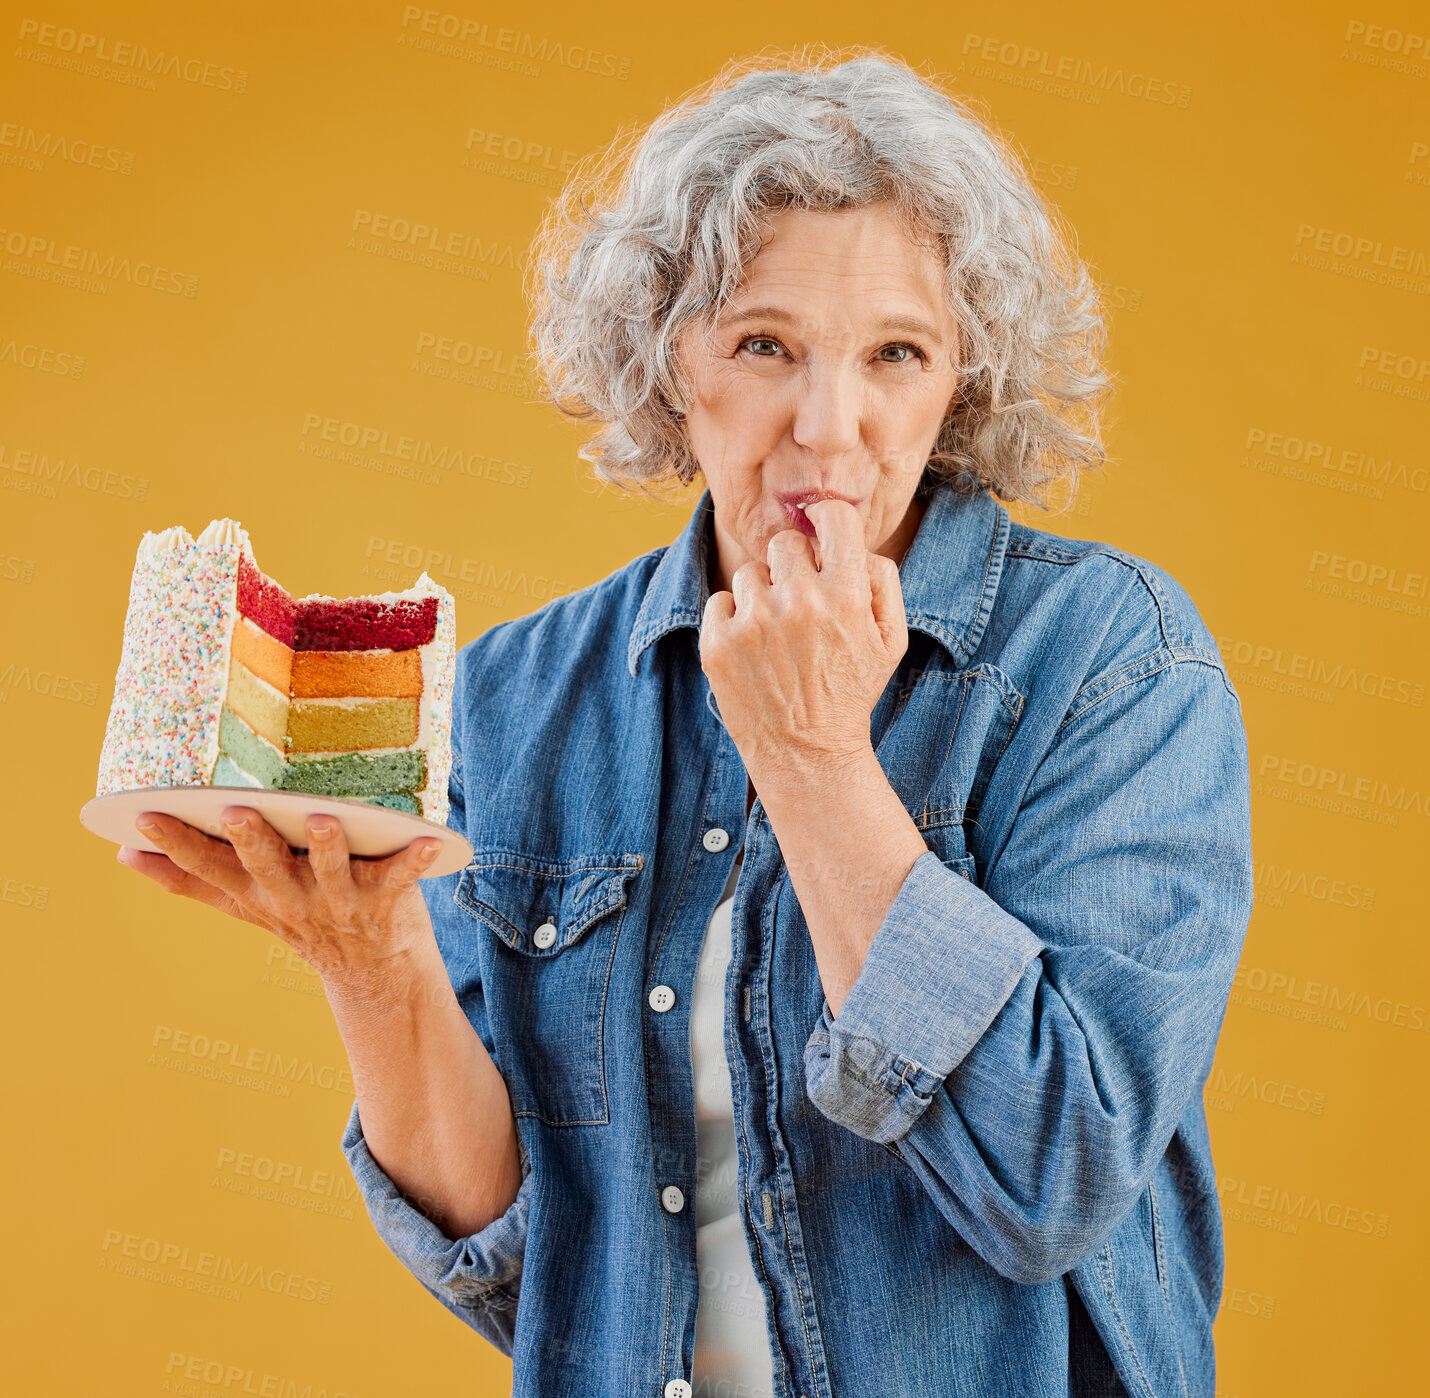 Buy stock photo One happy mature caucasian woman holding a colourful cake with a slice missing against a yellow background in the studio. Smiling white lady showing joy and happiness while celebrating her birthday